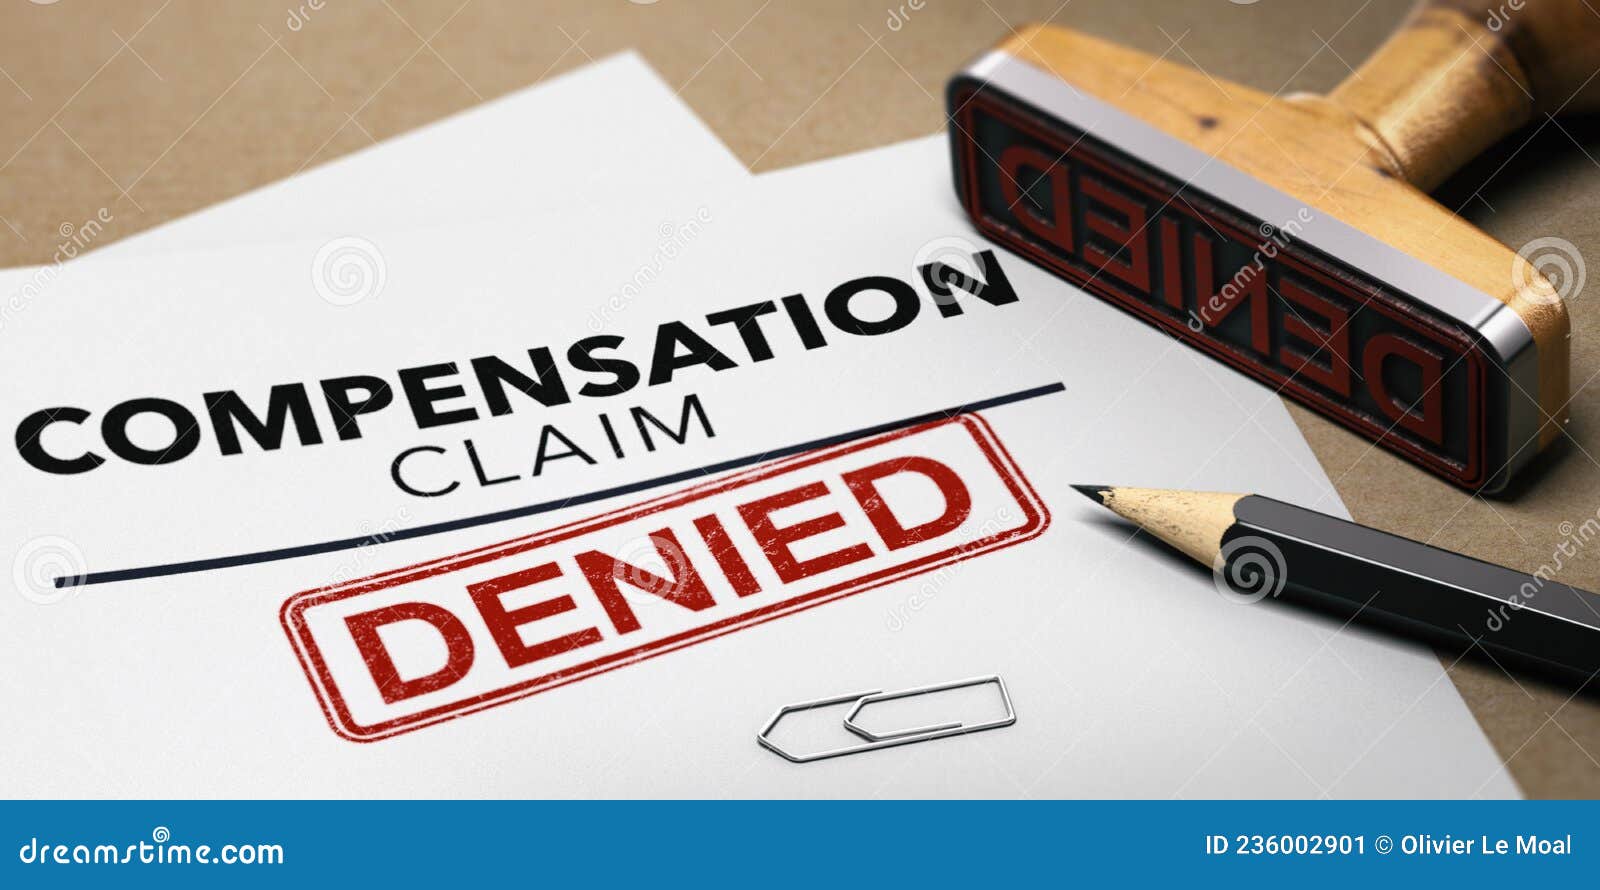 Guide to disputing a denied workers' compensation claim